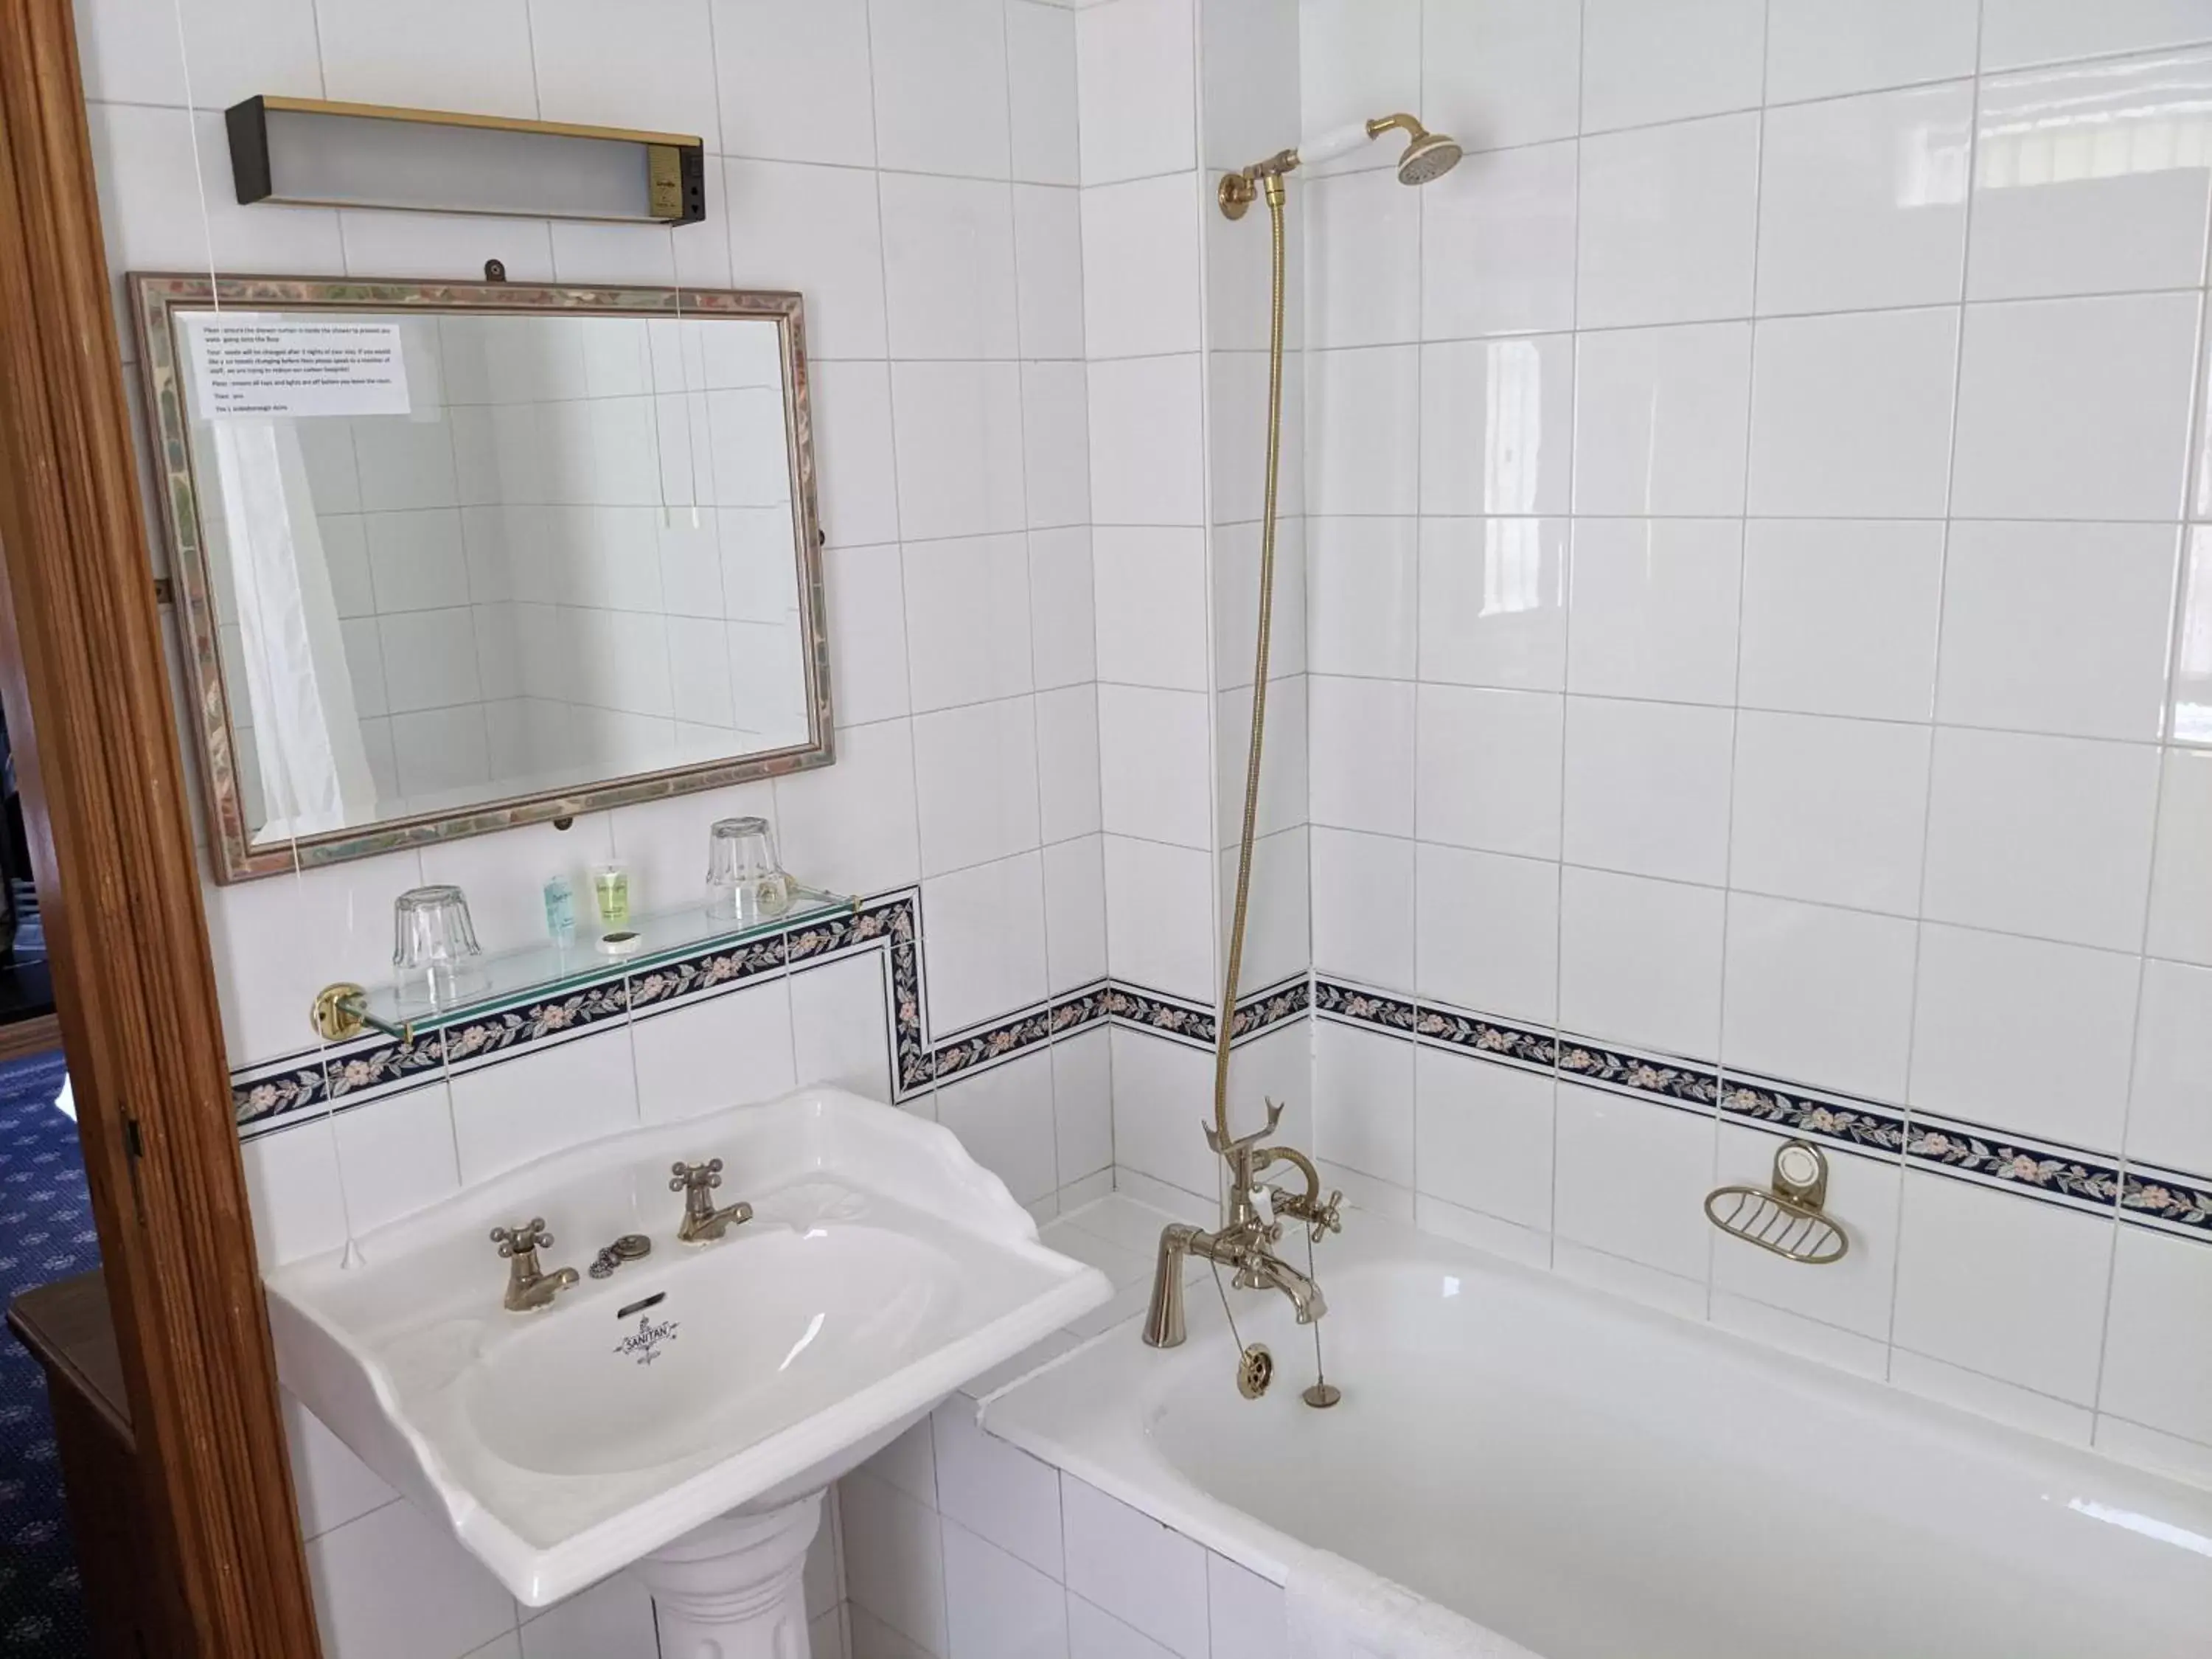 Bathroom in The Londesborough Arms bar with en-suite rooms